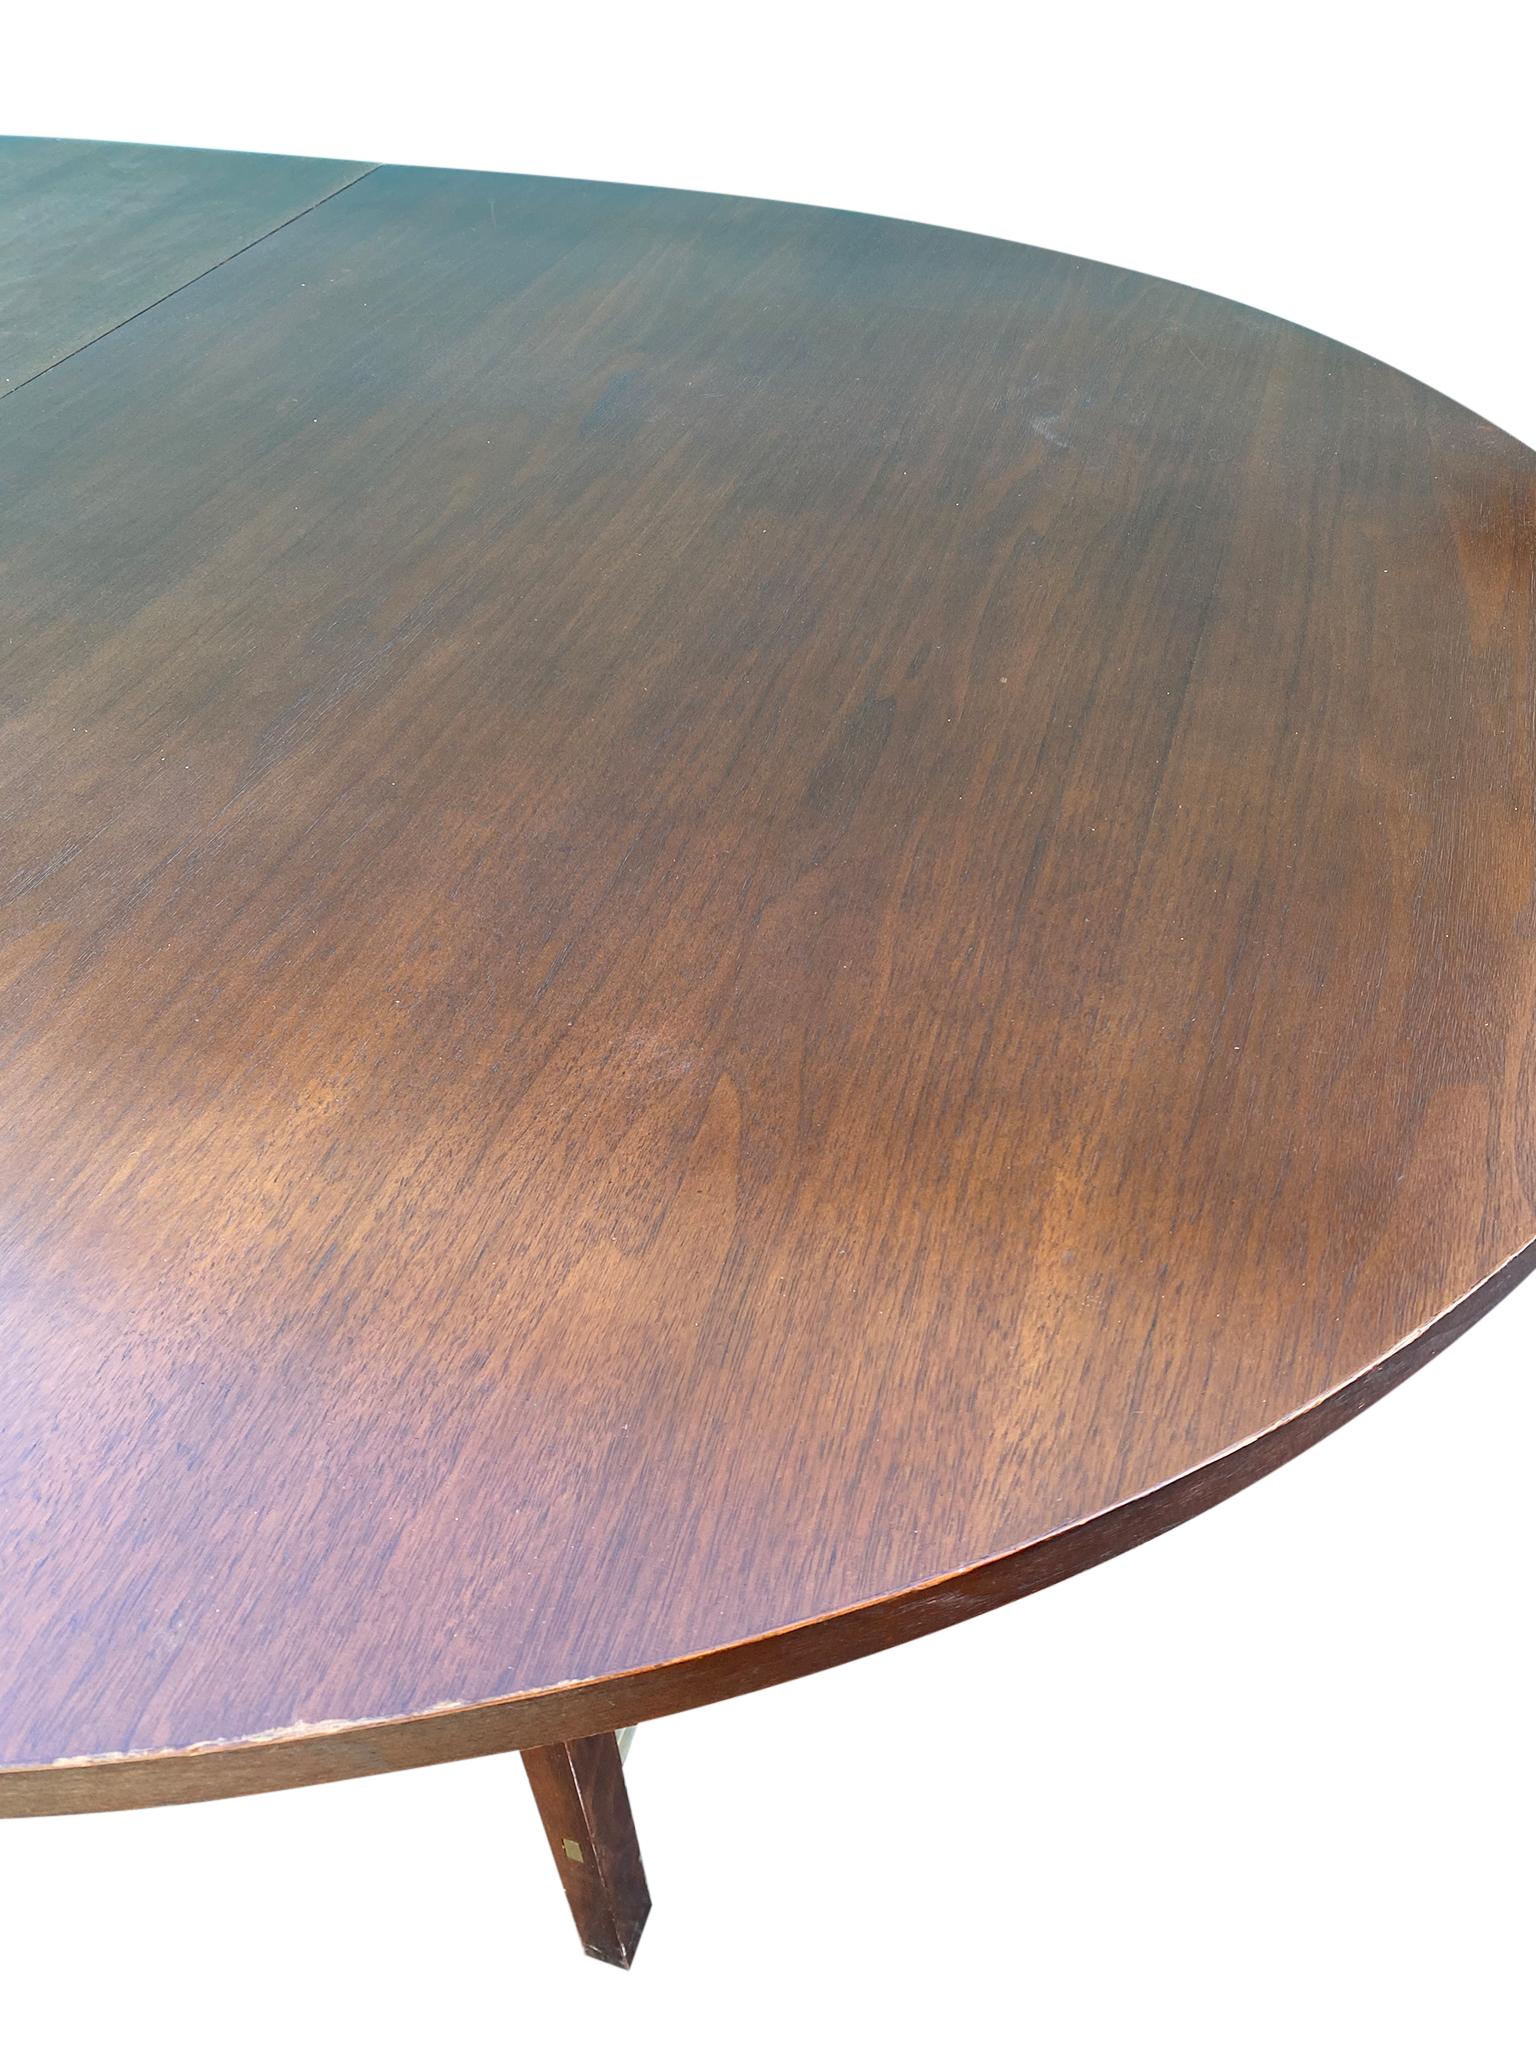 Mid-Century Modern Walnut Dining Table by Paul McCobb for Calvin 2 Leaves For Sale 3